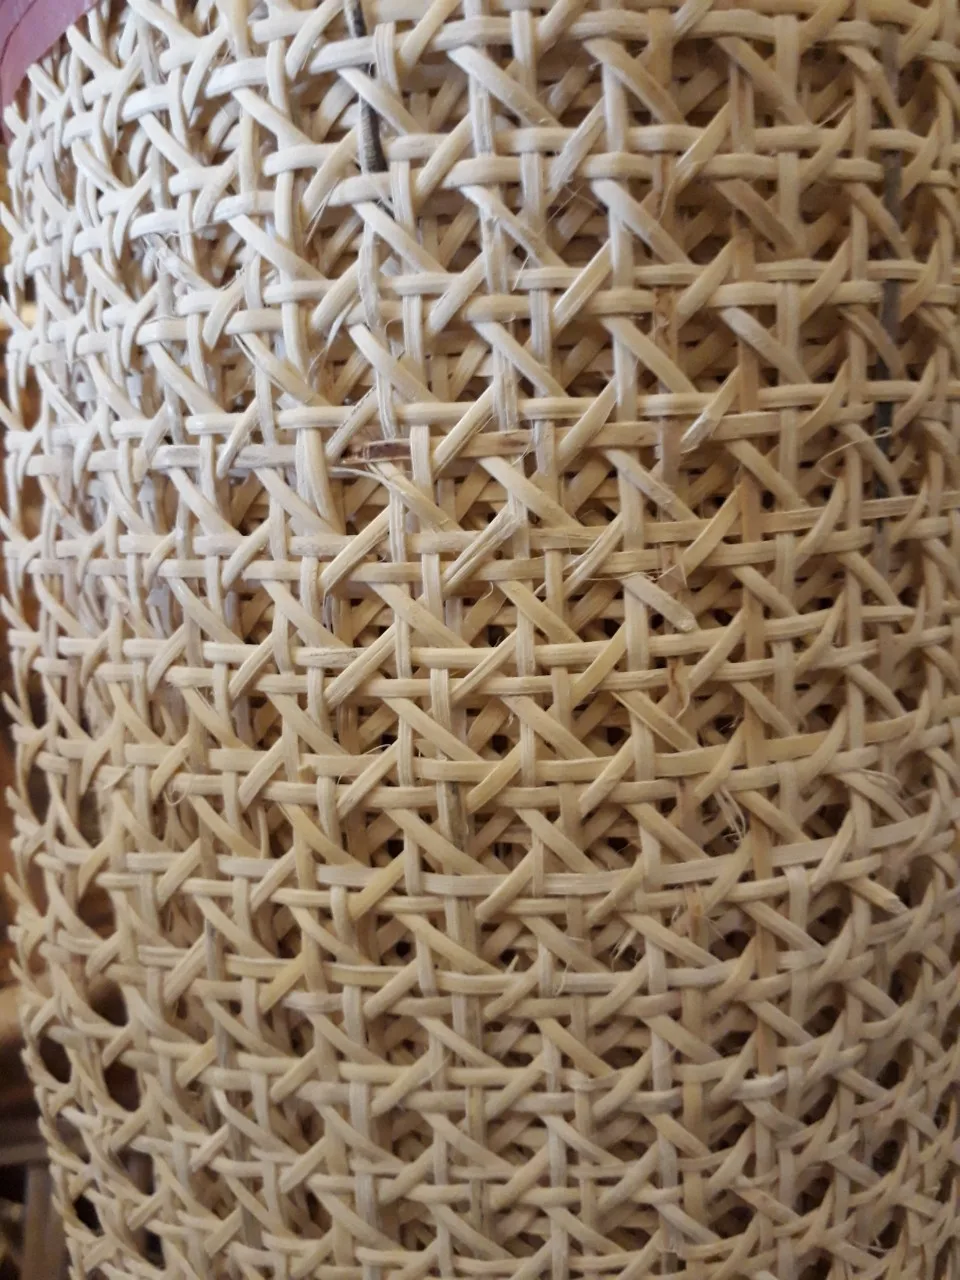 
Wholesale Rattan Webbing Natural Rattan Cane Bleached Webbing Roll Rattan For Furniture 